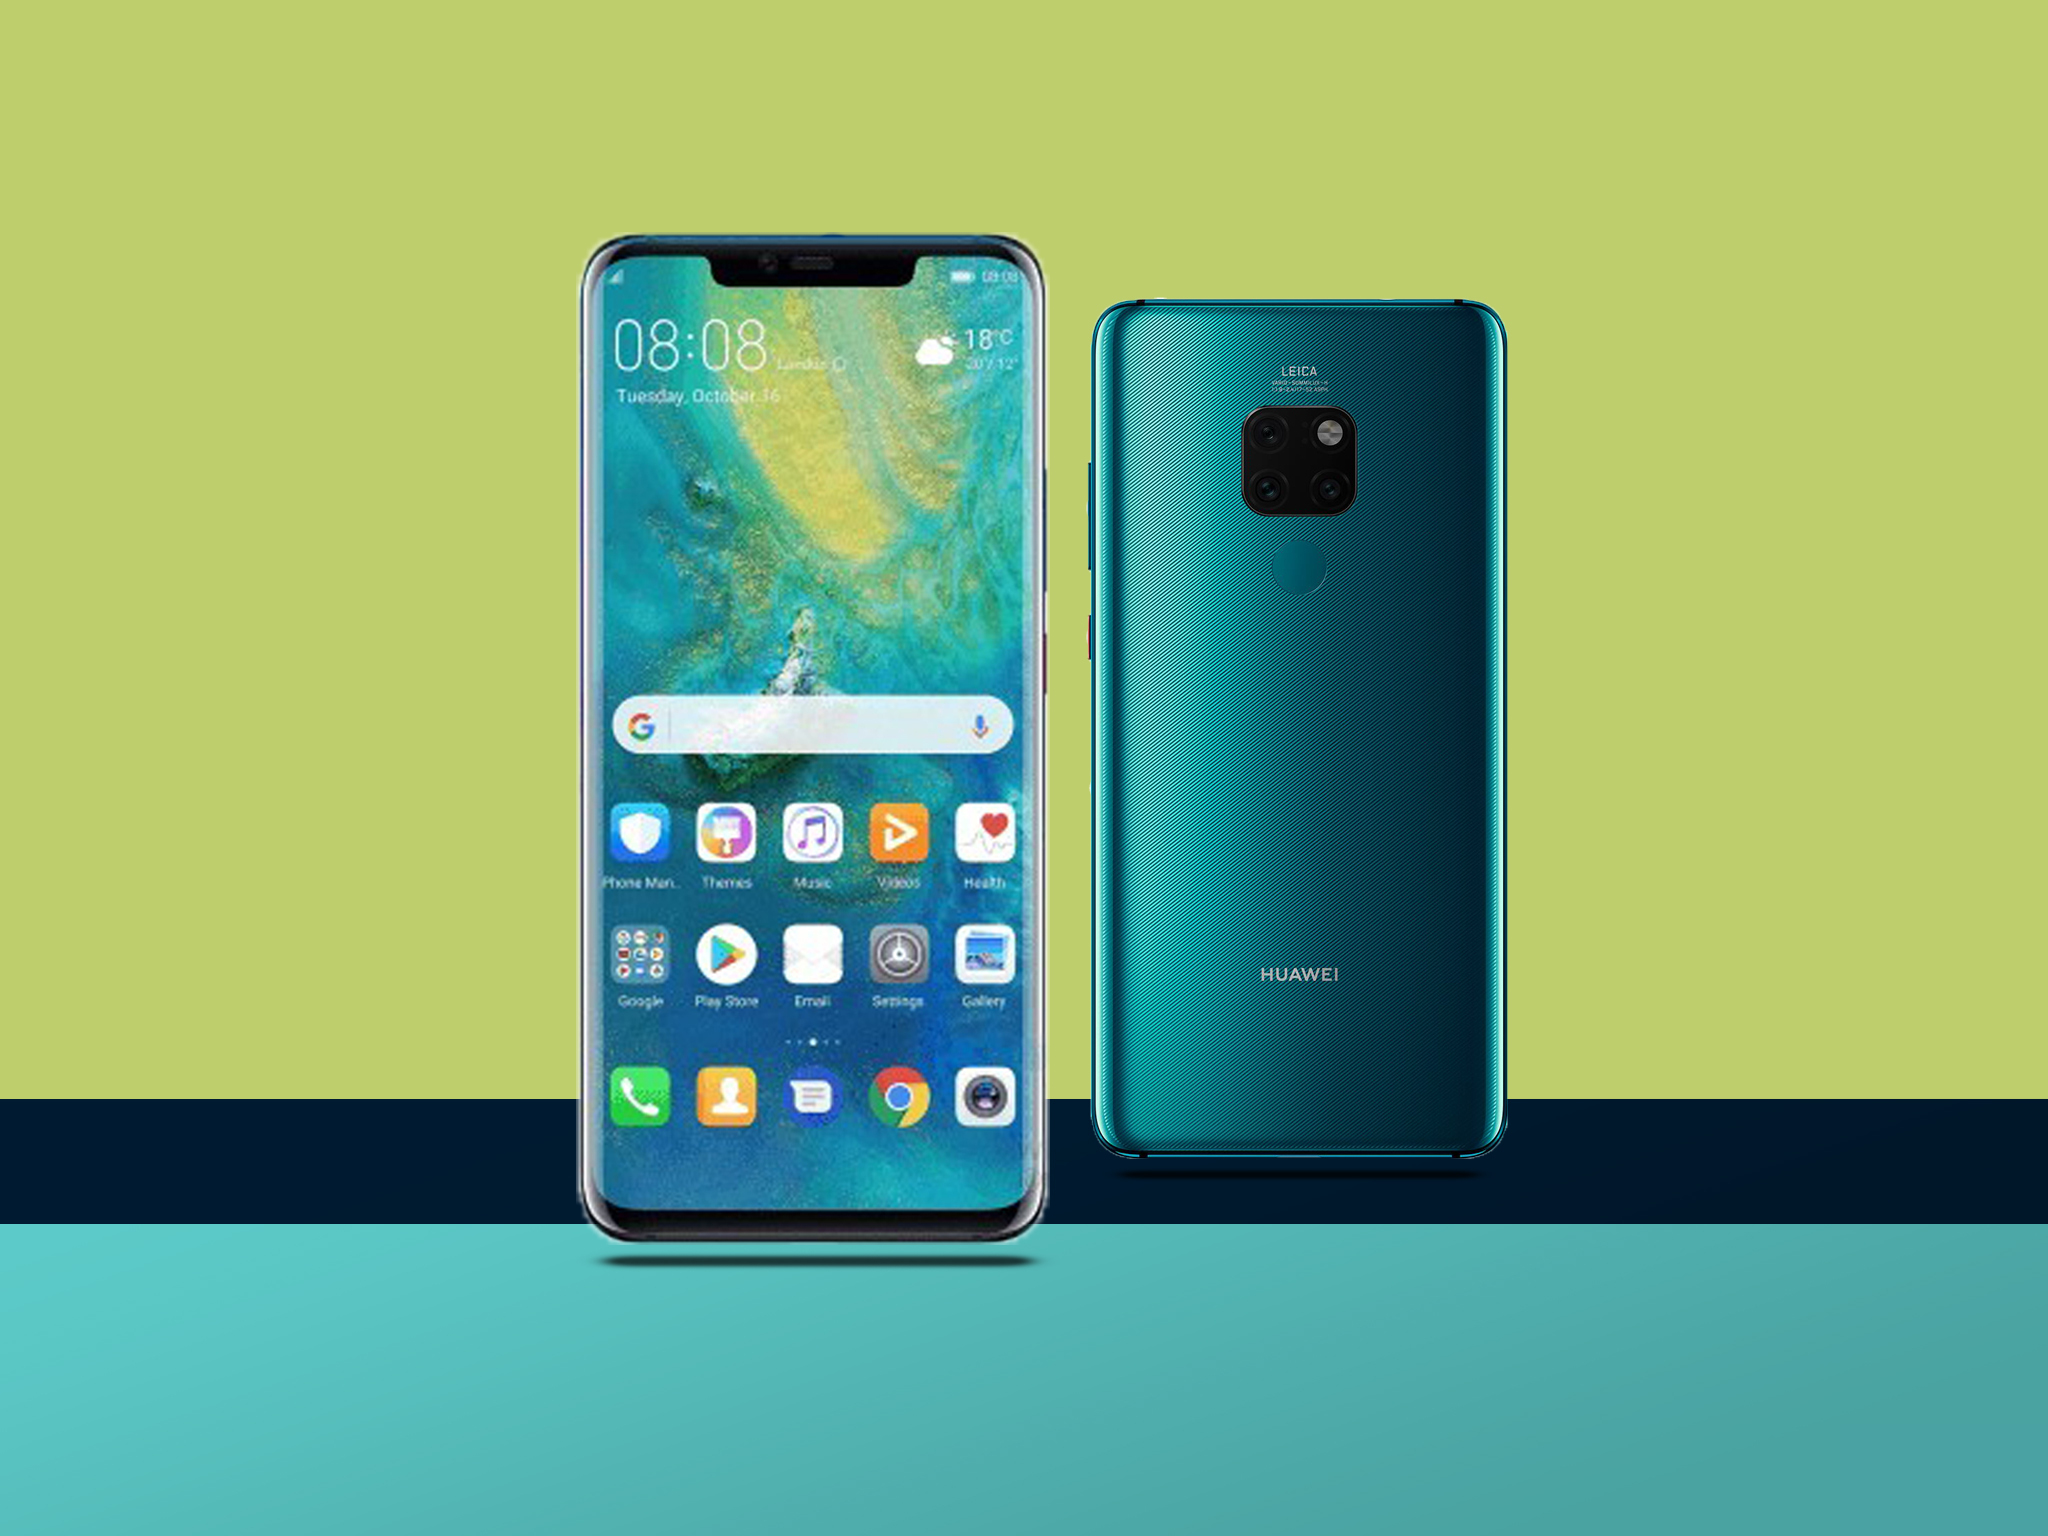 Huawei Mate 20 vs Mate 20 Pro: What's the difference?